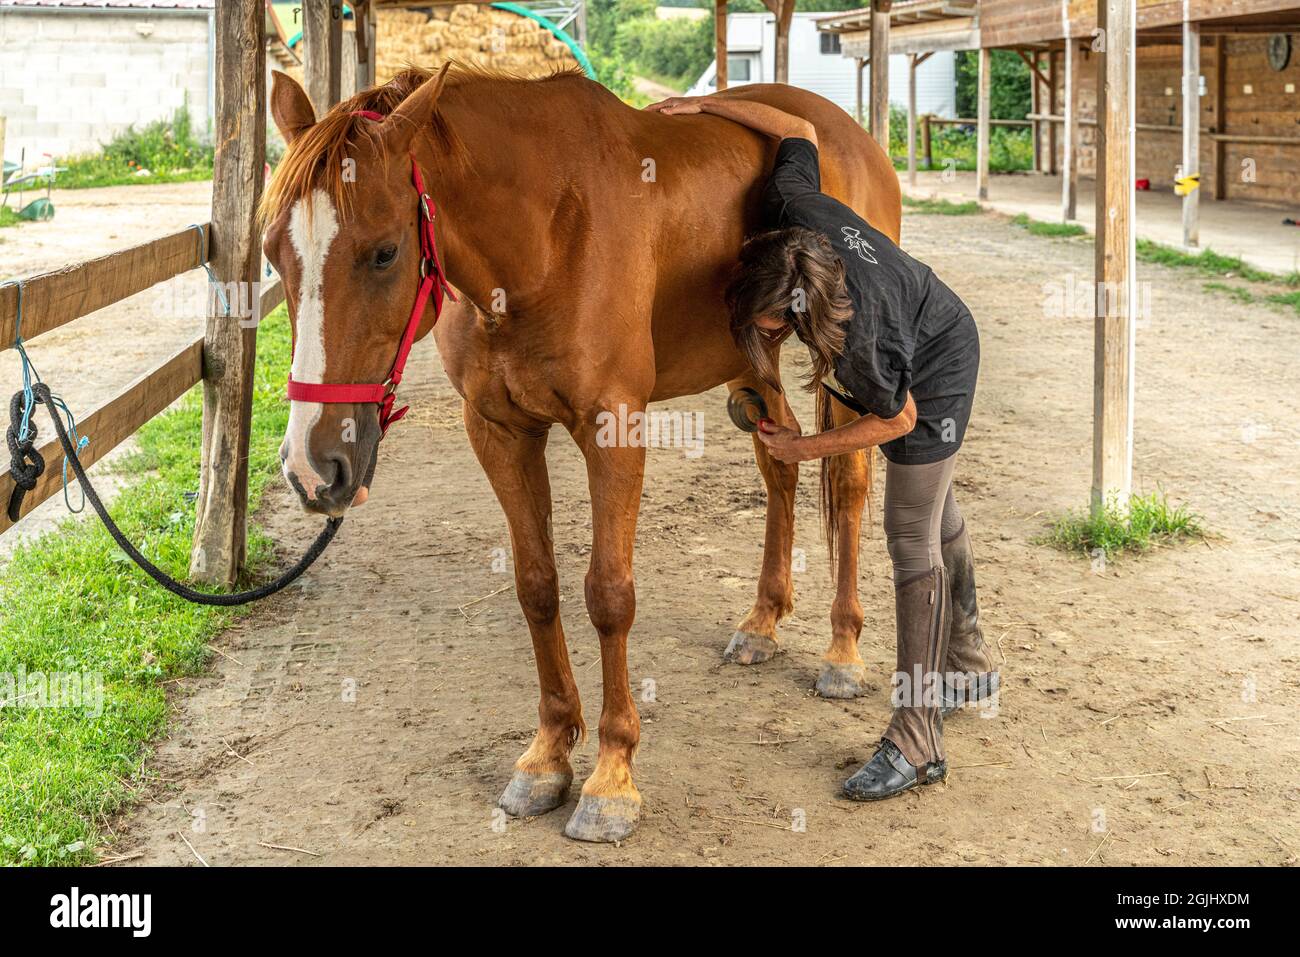 Horsewoman takes care of her by grooming, brushing and cleaning the coat and hooves. Lyon, France, Europe Stock Photo